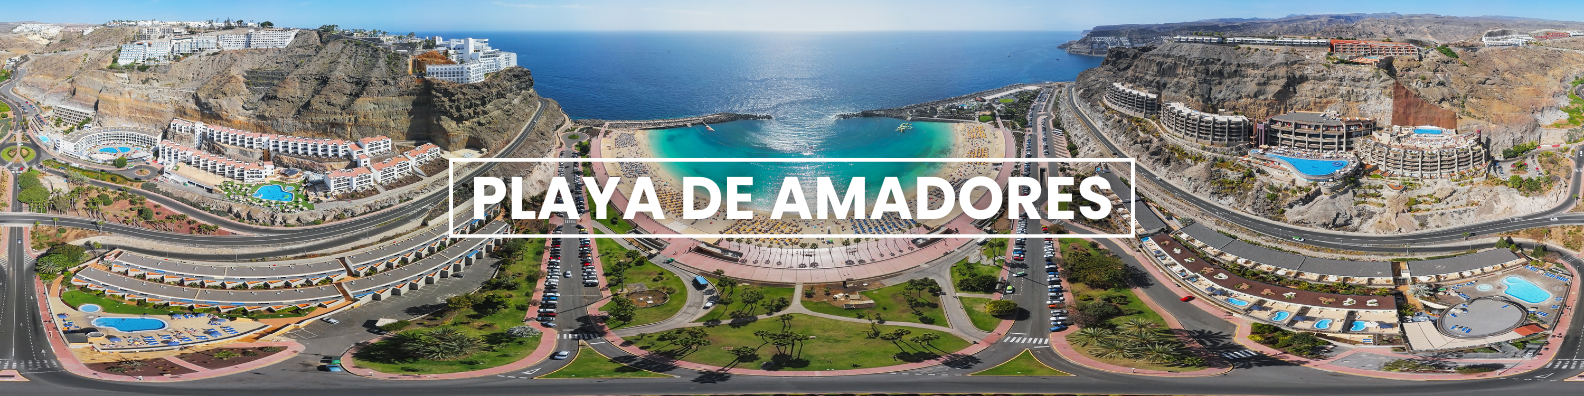 an aerial view of a beach with the words playa de amadores written on it . Barter's Travelnet 